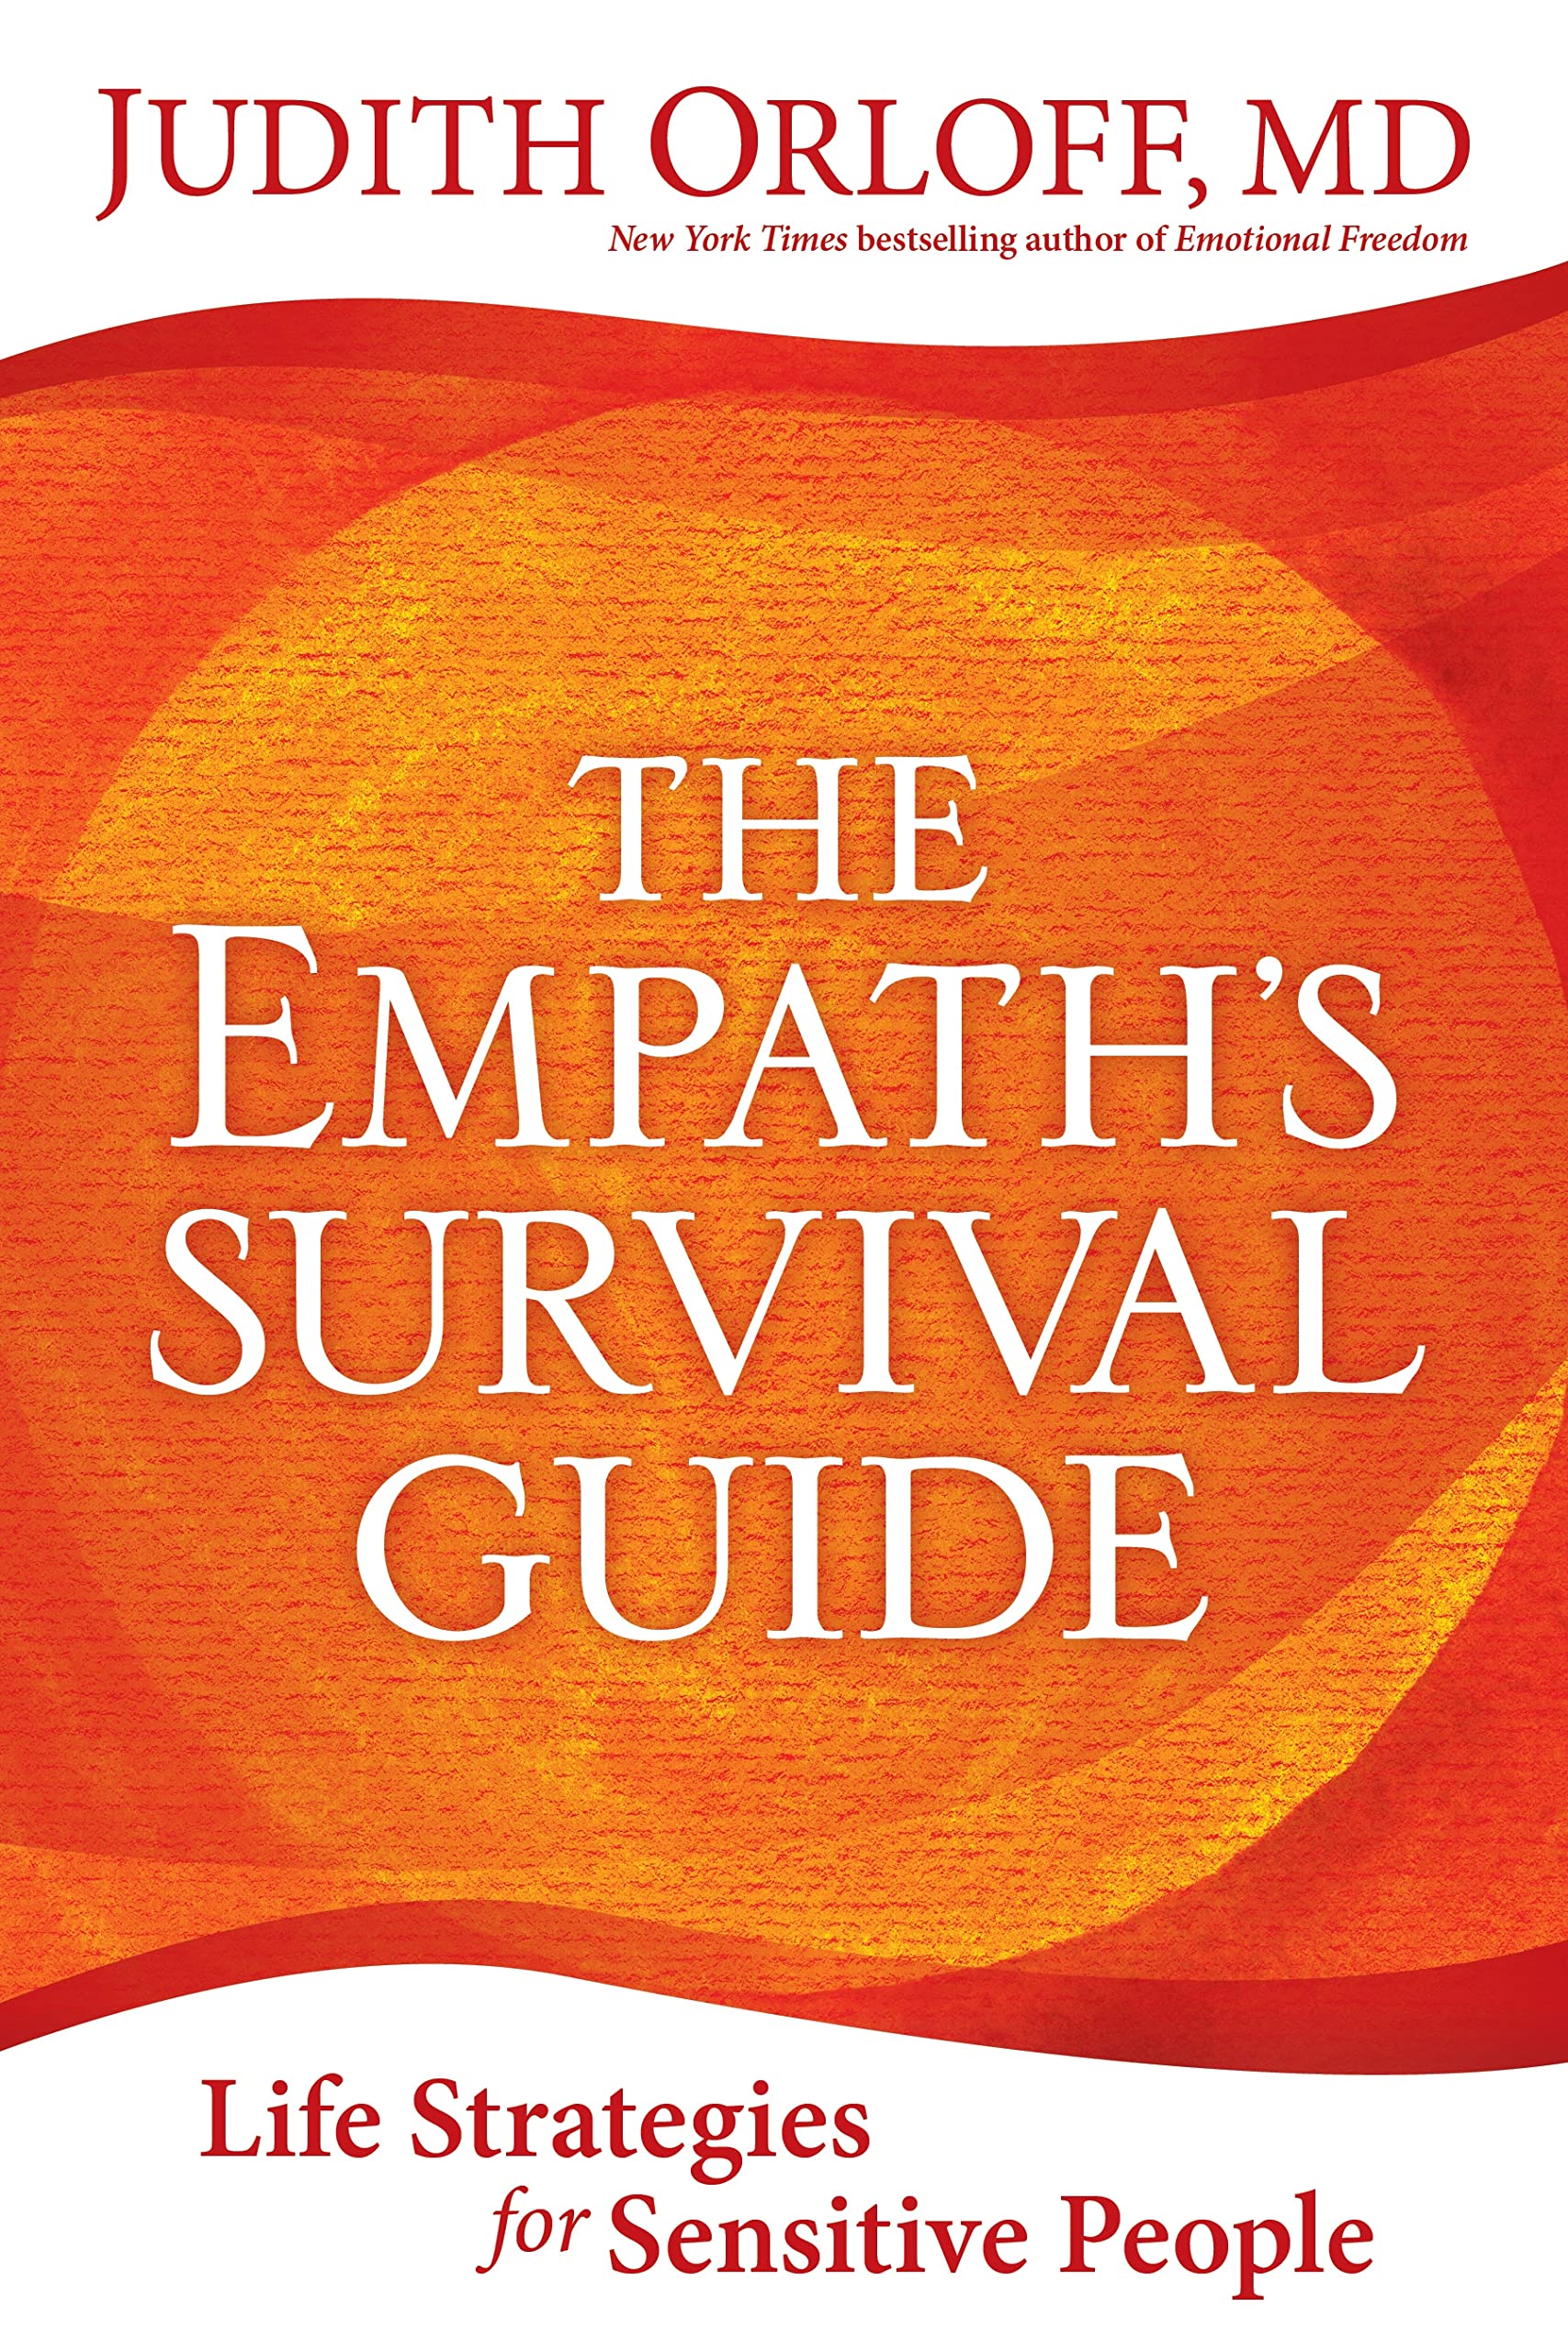 The Empath's Survival Guide: Life Strategies for Sensitive People - Judith Orloff